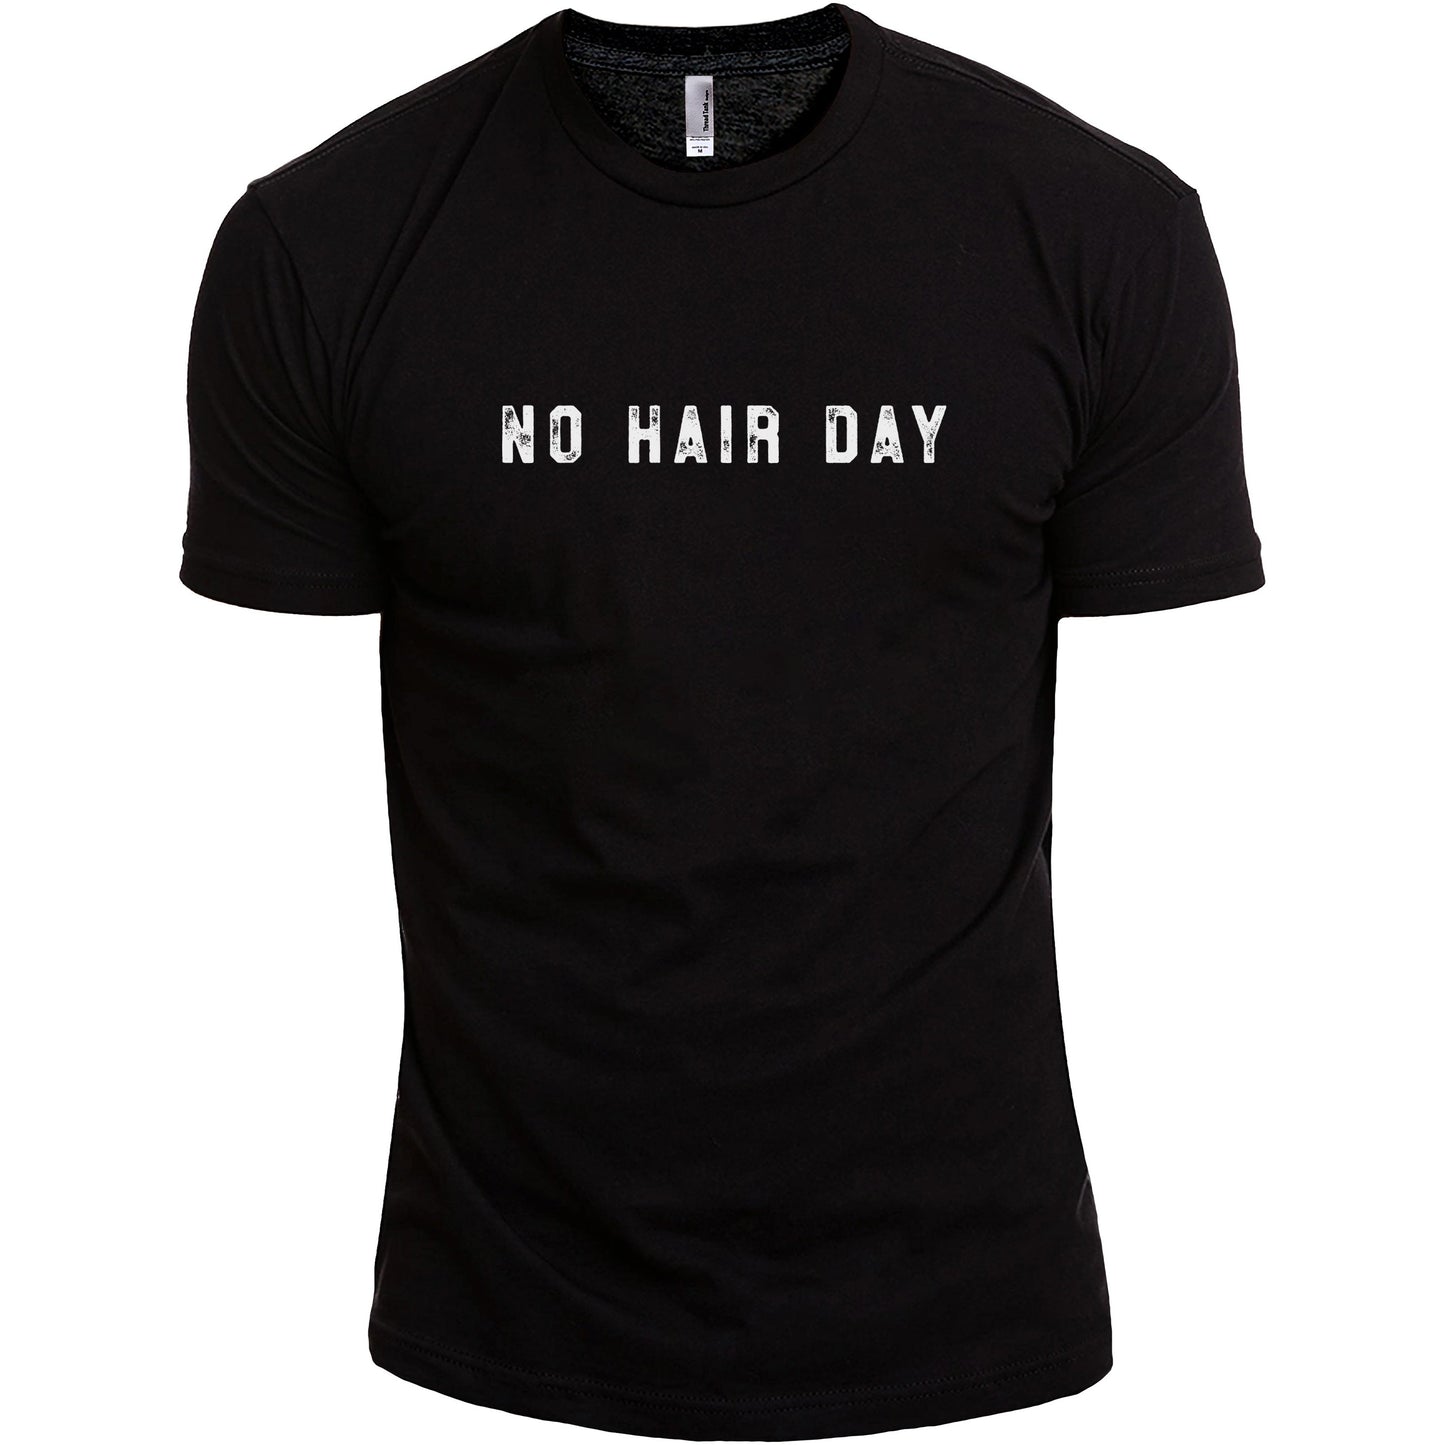 No Hair Day Black Printed Graphic Men's Crew T-Shirt Tee Side View